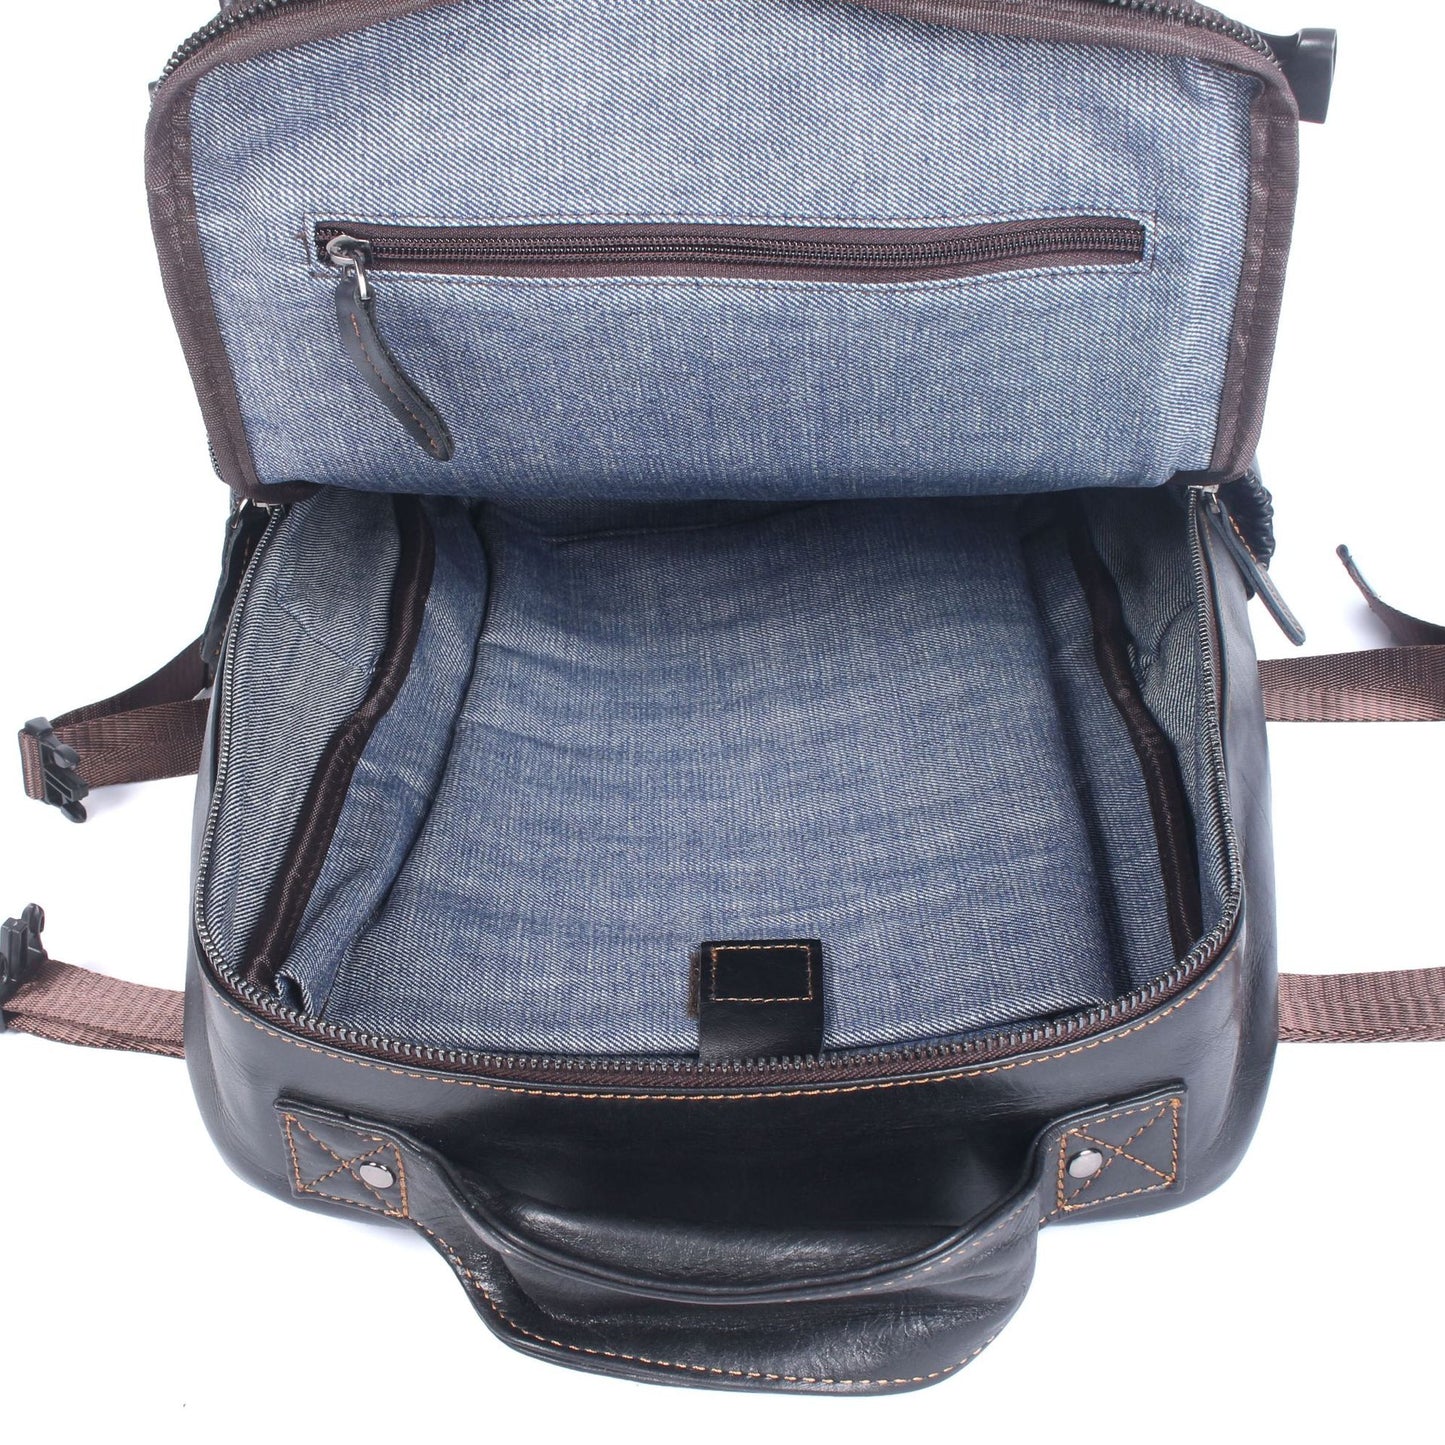 Casual Cowhide Leather Laptop Backpack for Traveling 2006-Backpack-Black-Free Shipping Leatheretro